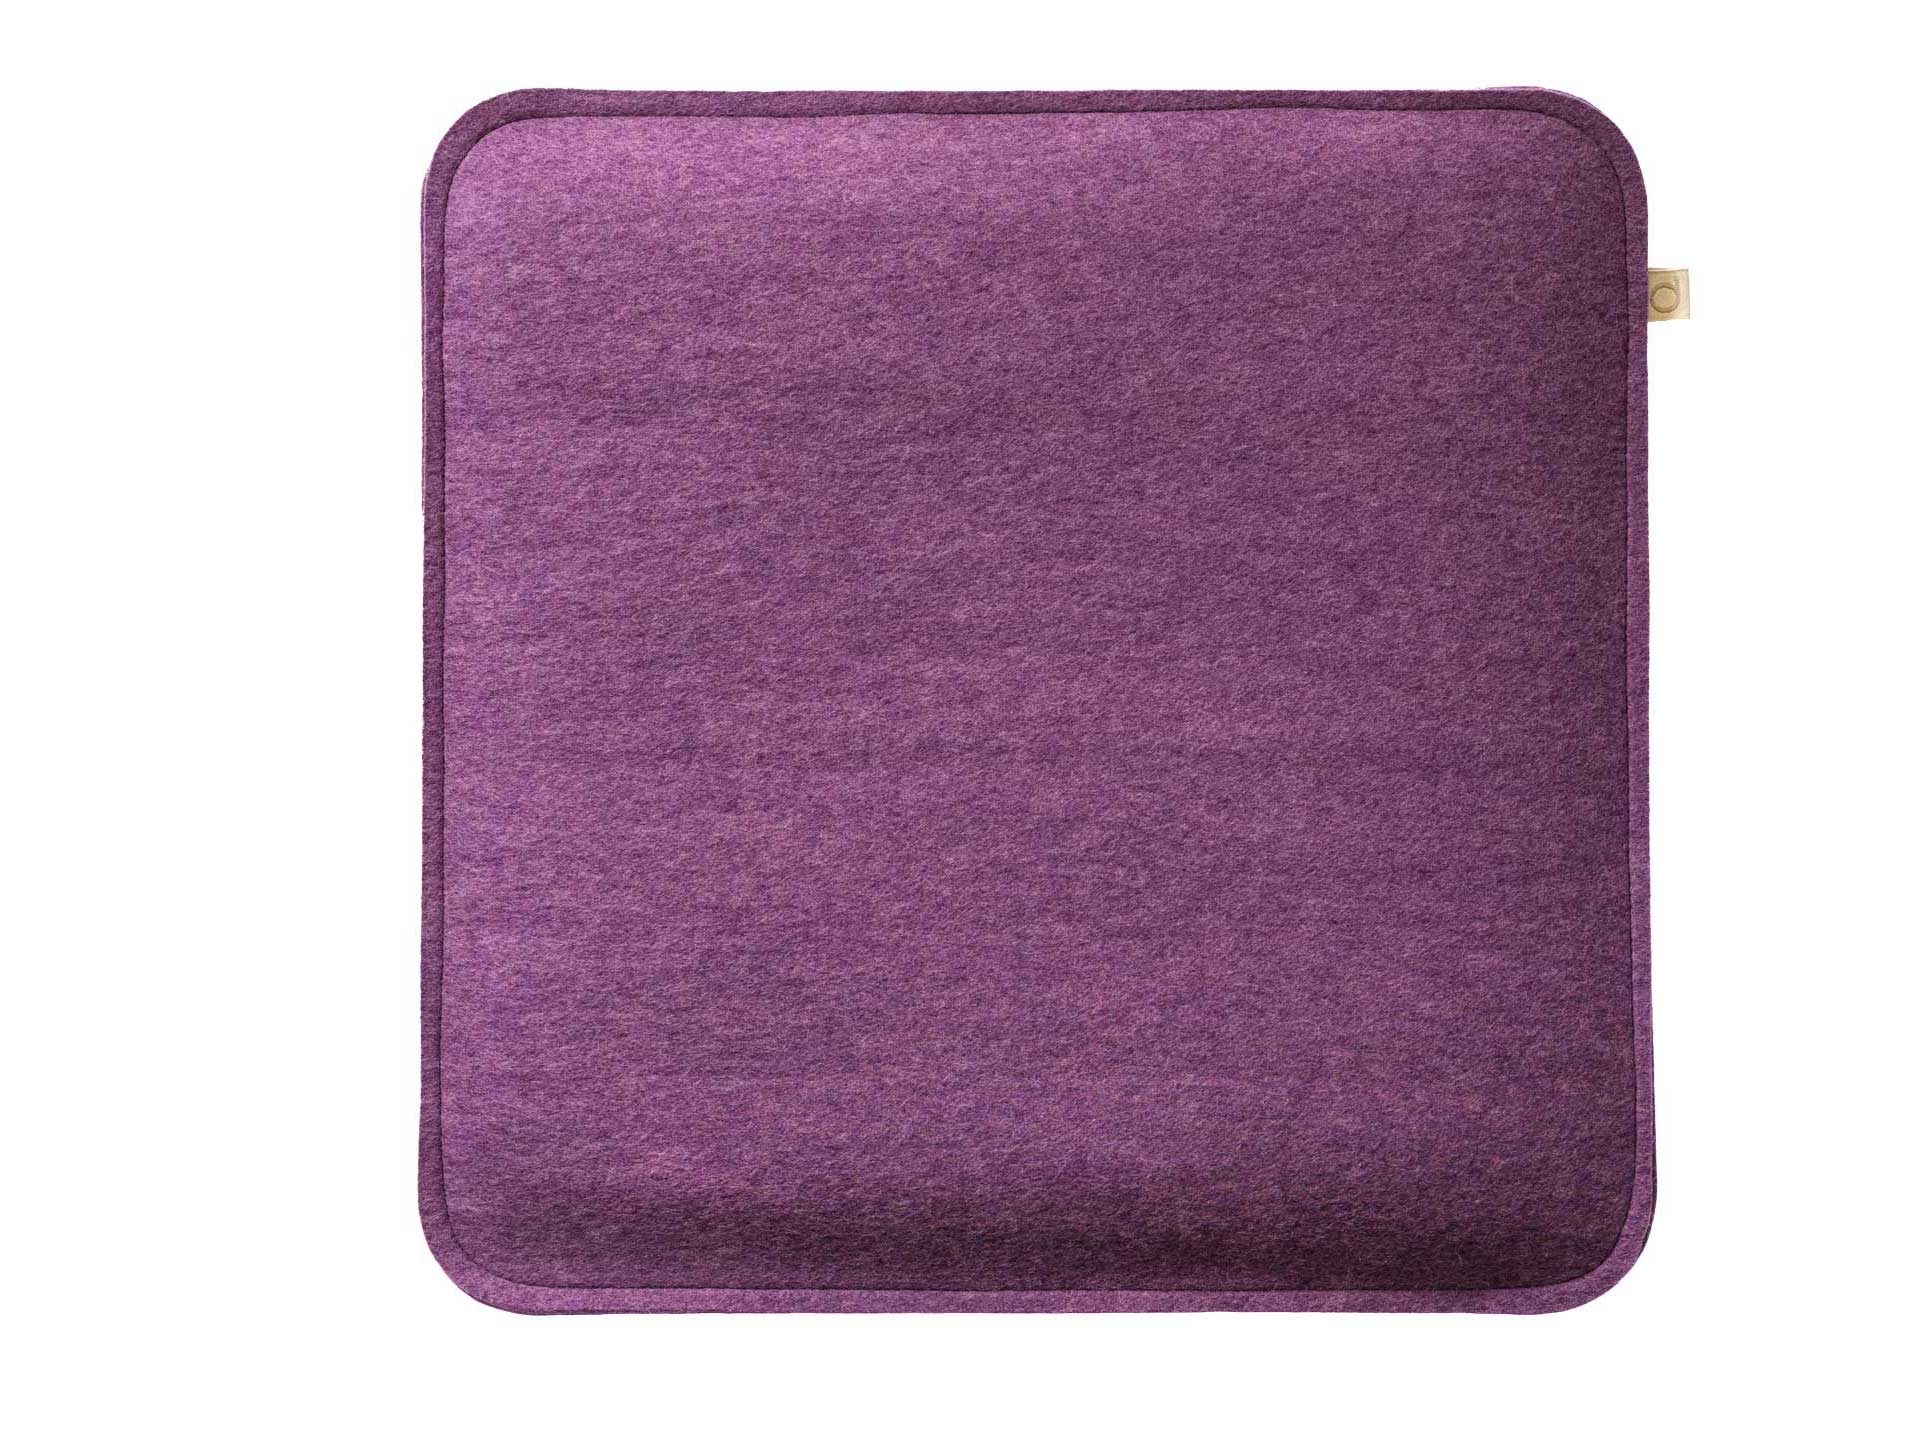 Upolstered Seat Pad